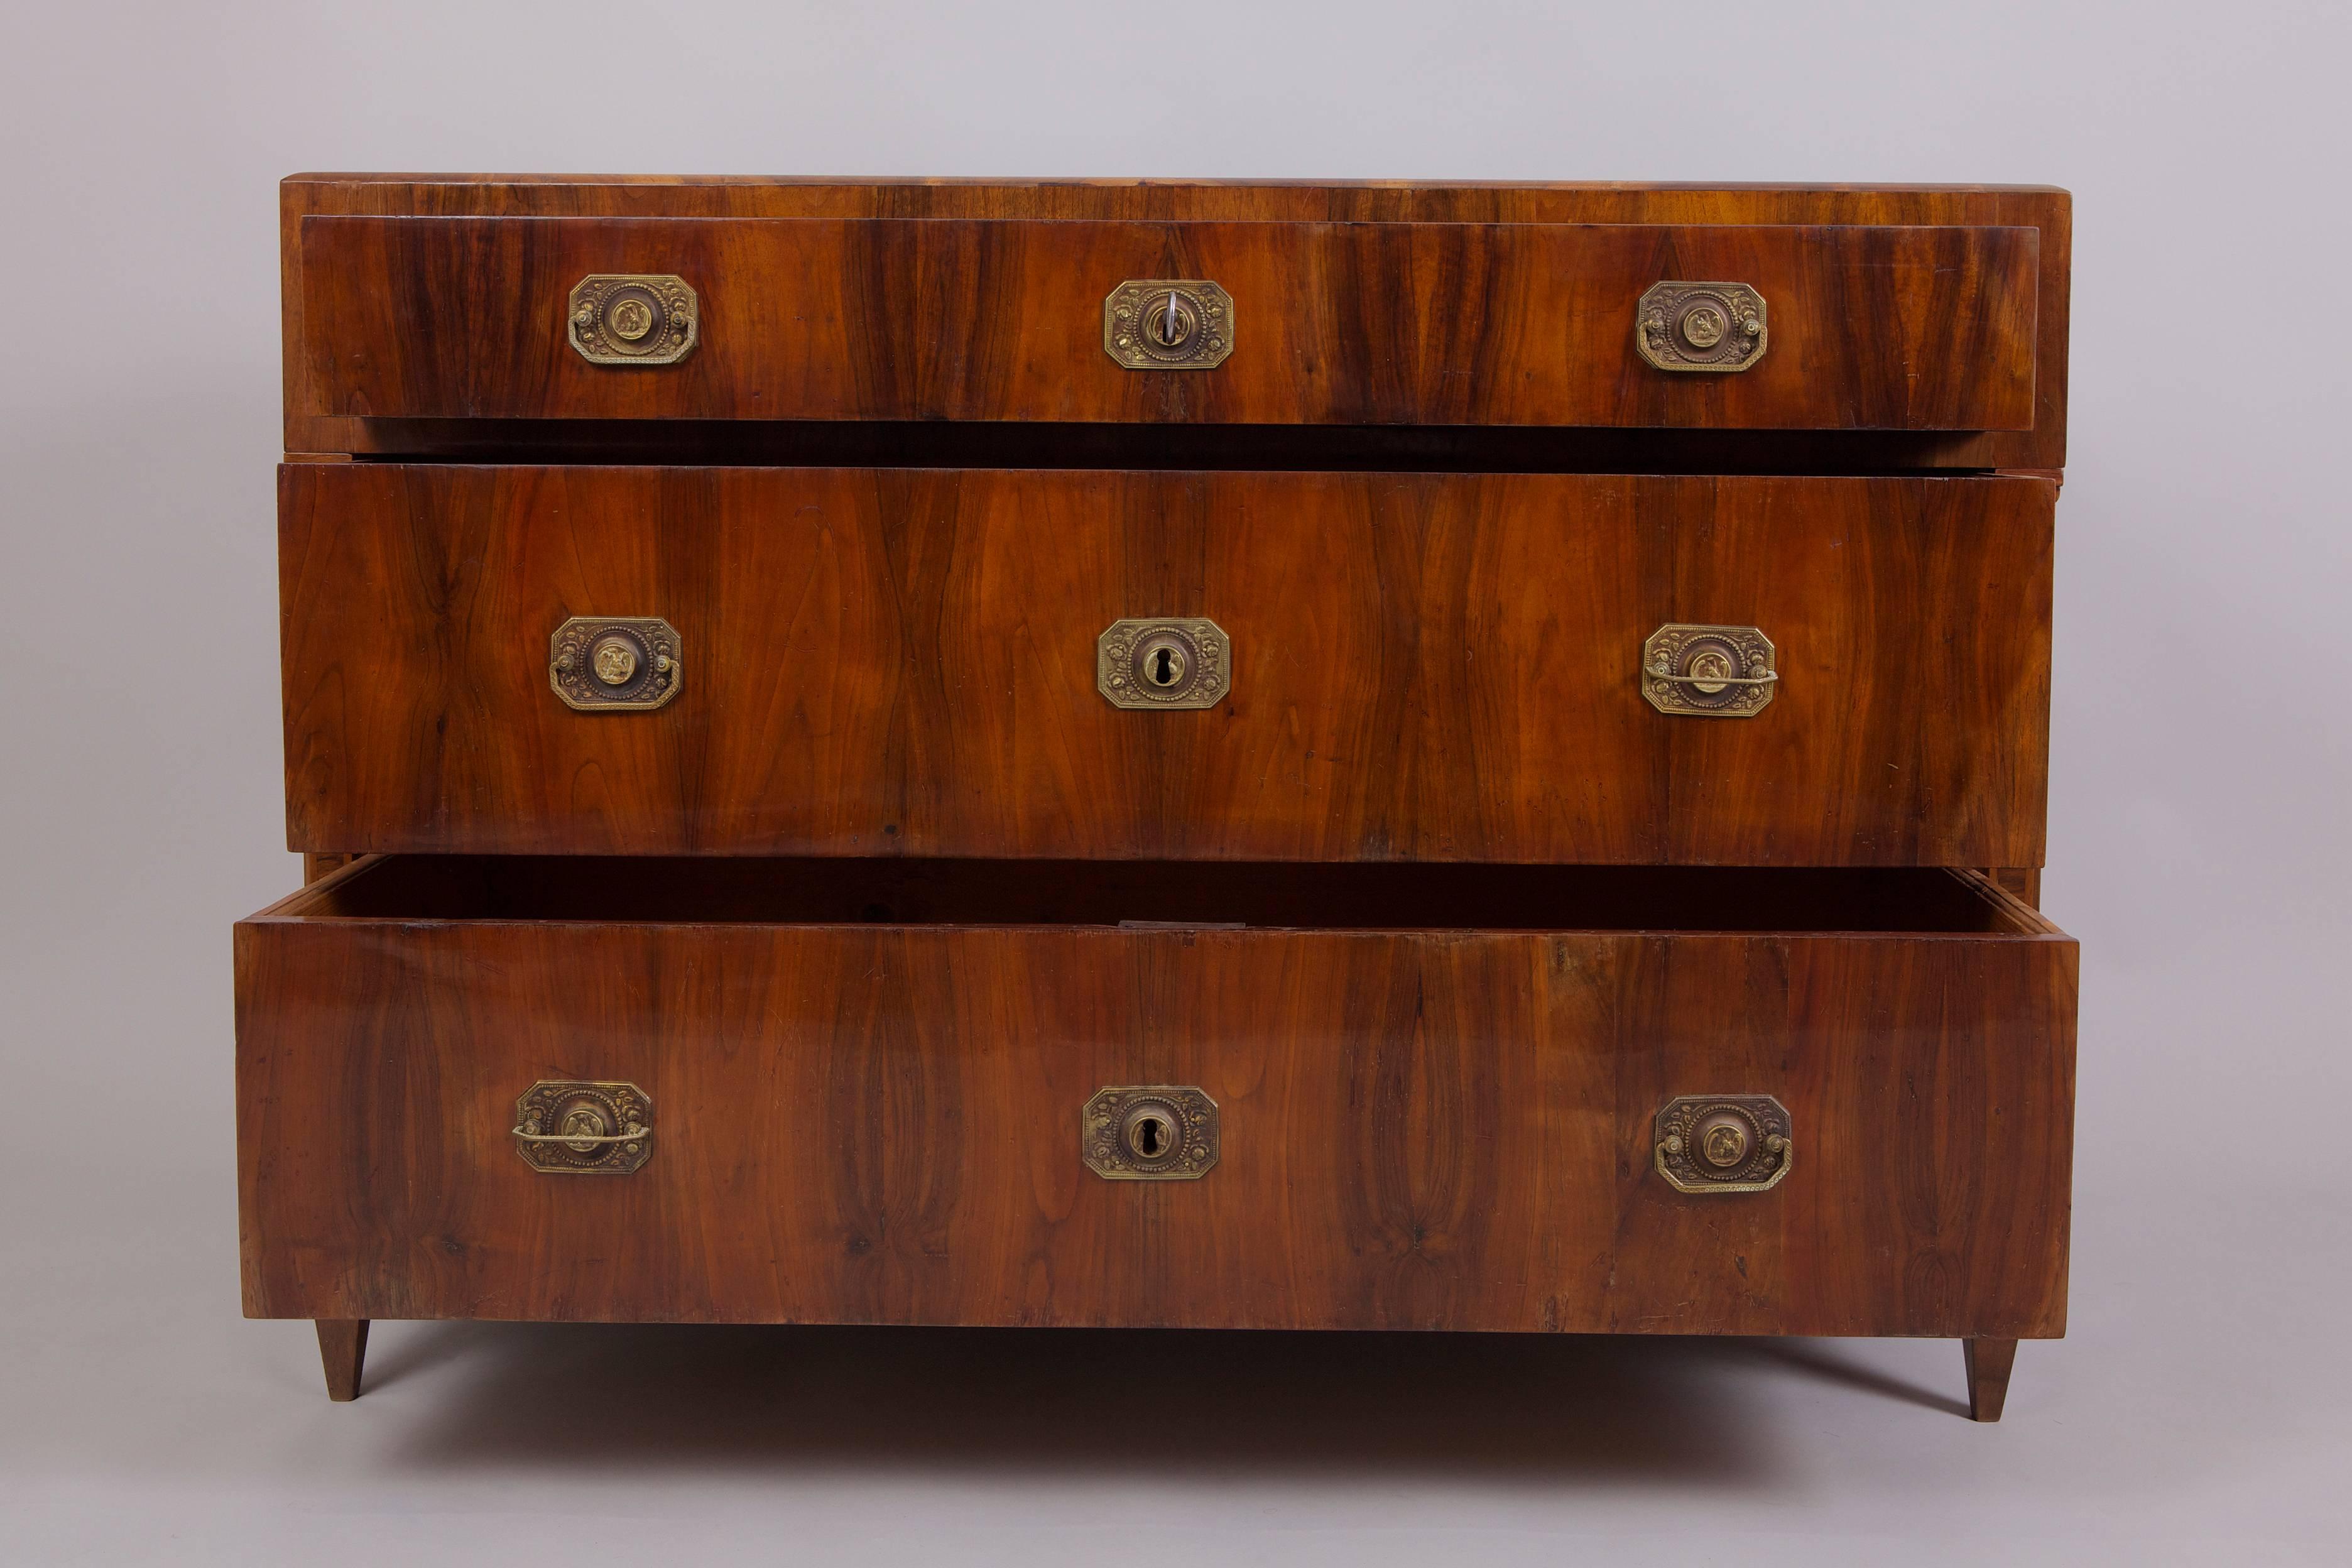 Biedermeier Chest of drawers, commode. 
Completely restored. Shellac polish used for the surface. 
Country of origin is Austria from period 1820-1829.